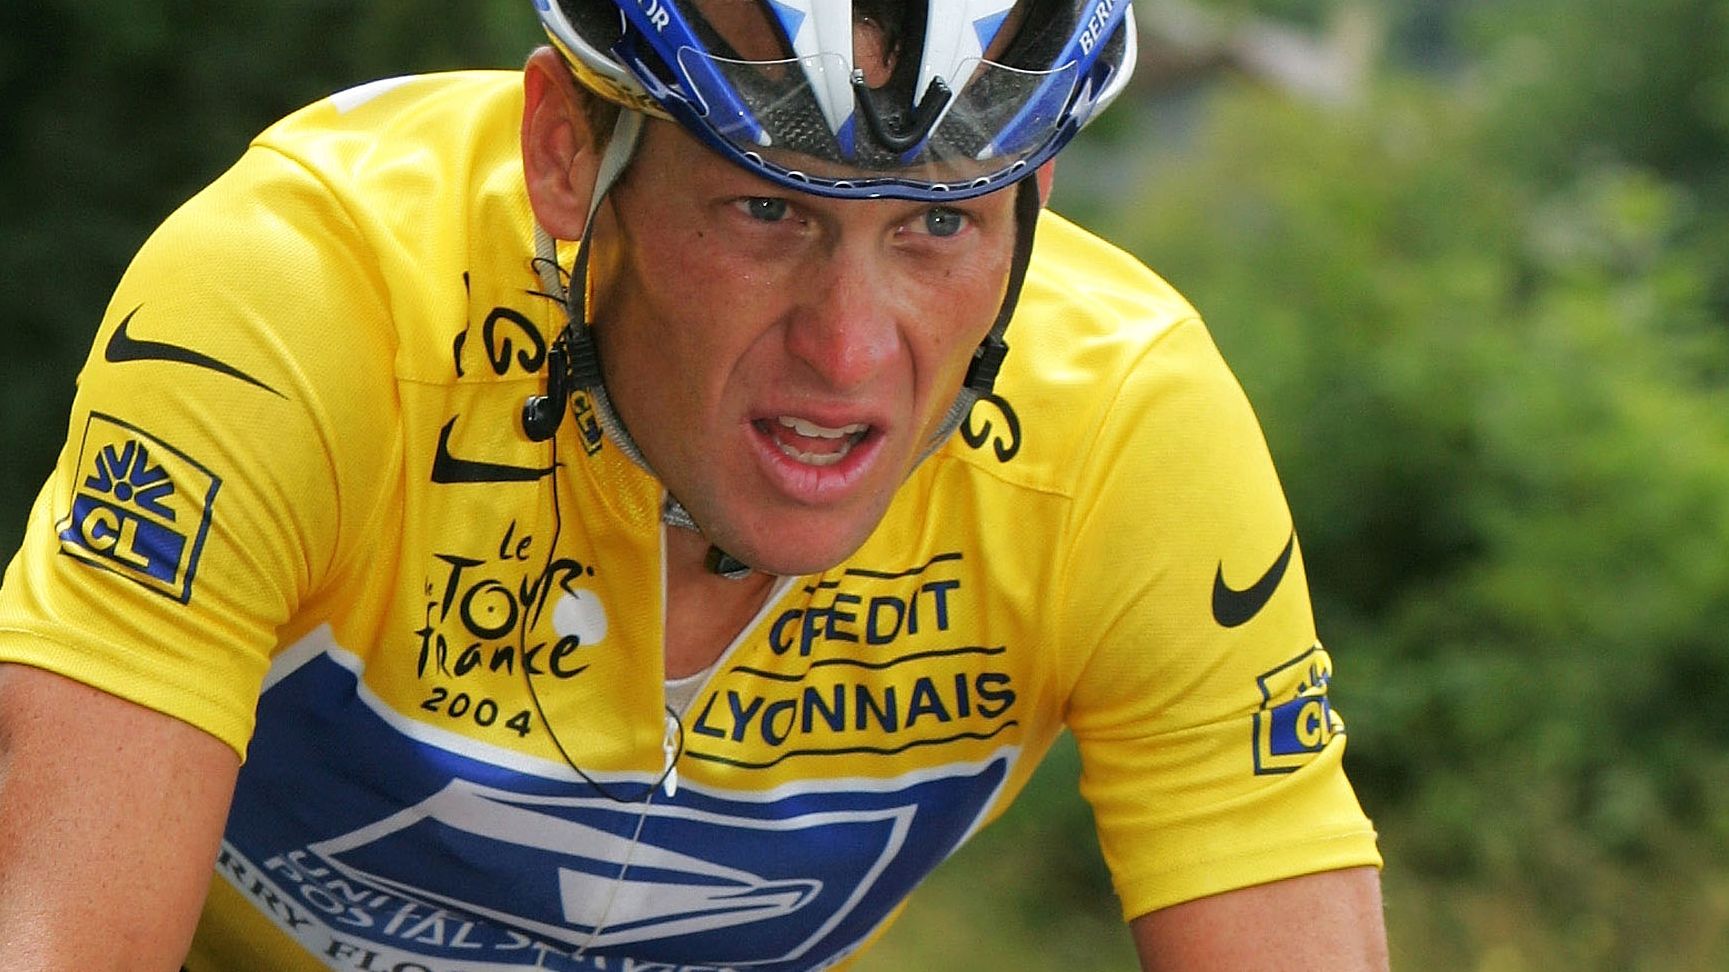 Lance Armstrong won the Tour de France seven times, but he later admitted to using performance-enhancing drugs.